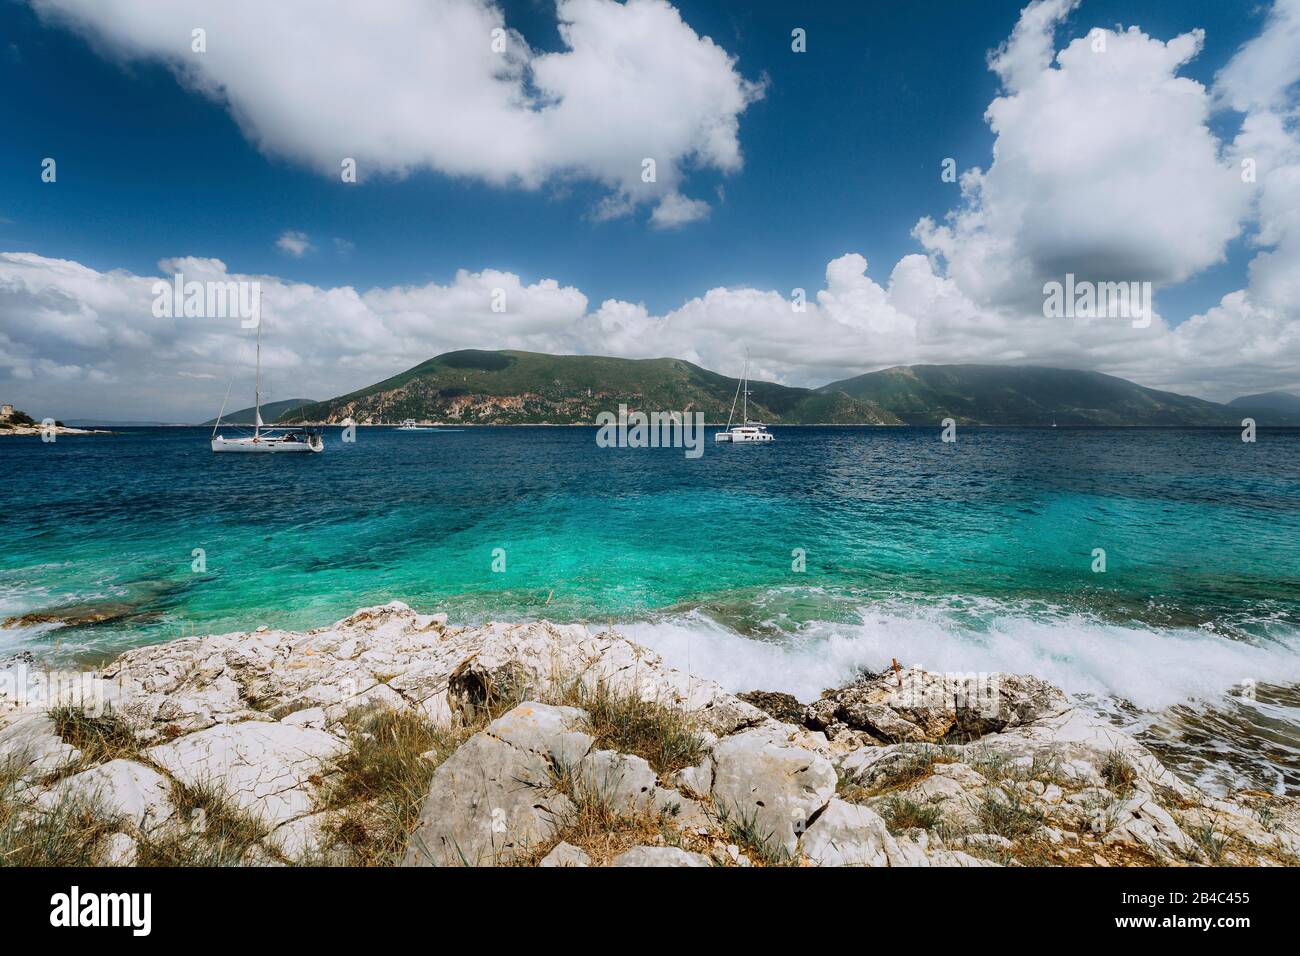 Crystal clear transparent blue turquoise teal Mediterranean sea water in Fiskardo town. White yacht in open sea at anchor under amazing white clouds, Kefalonia, Ionian islands, Greece. Stock Photo